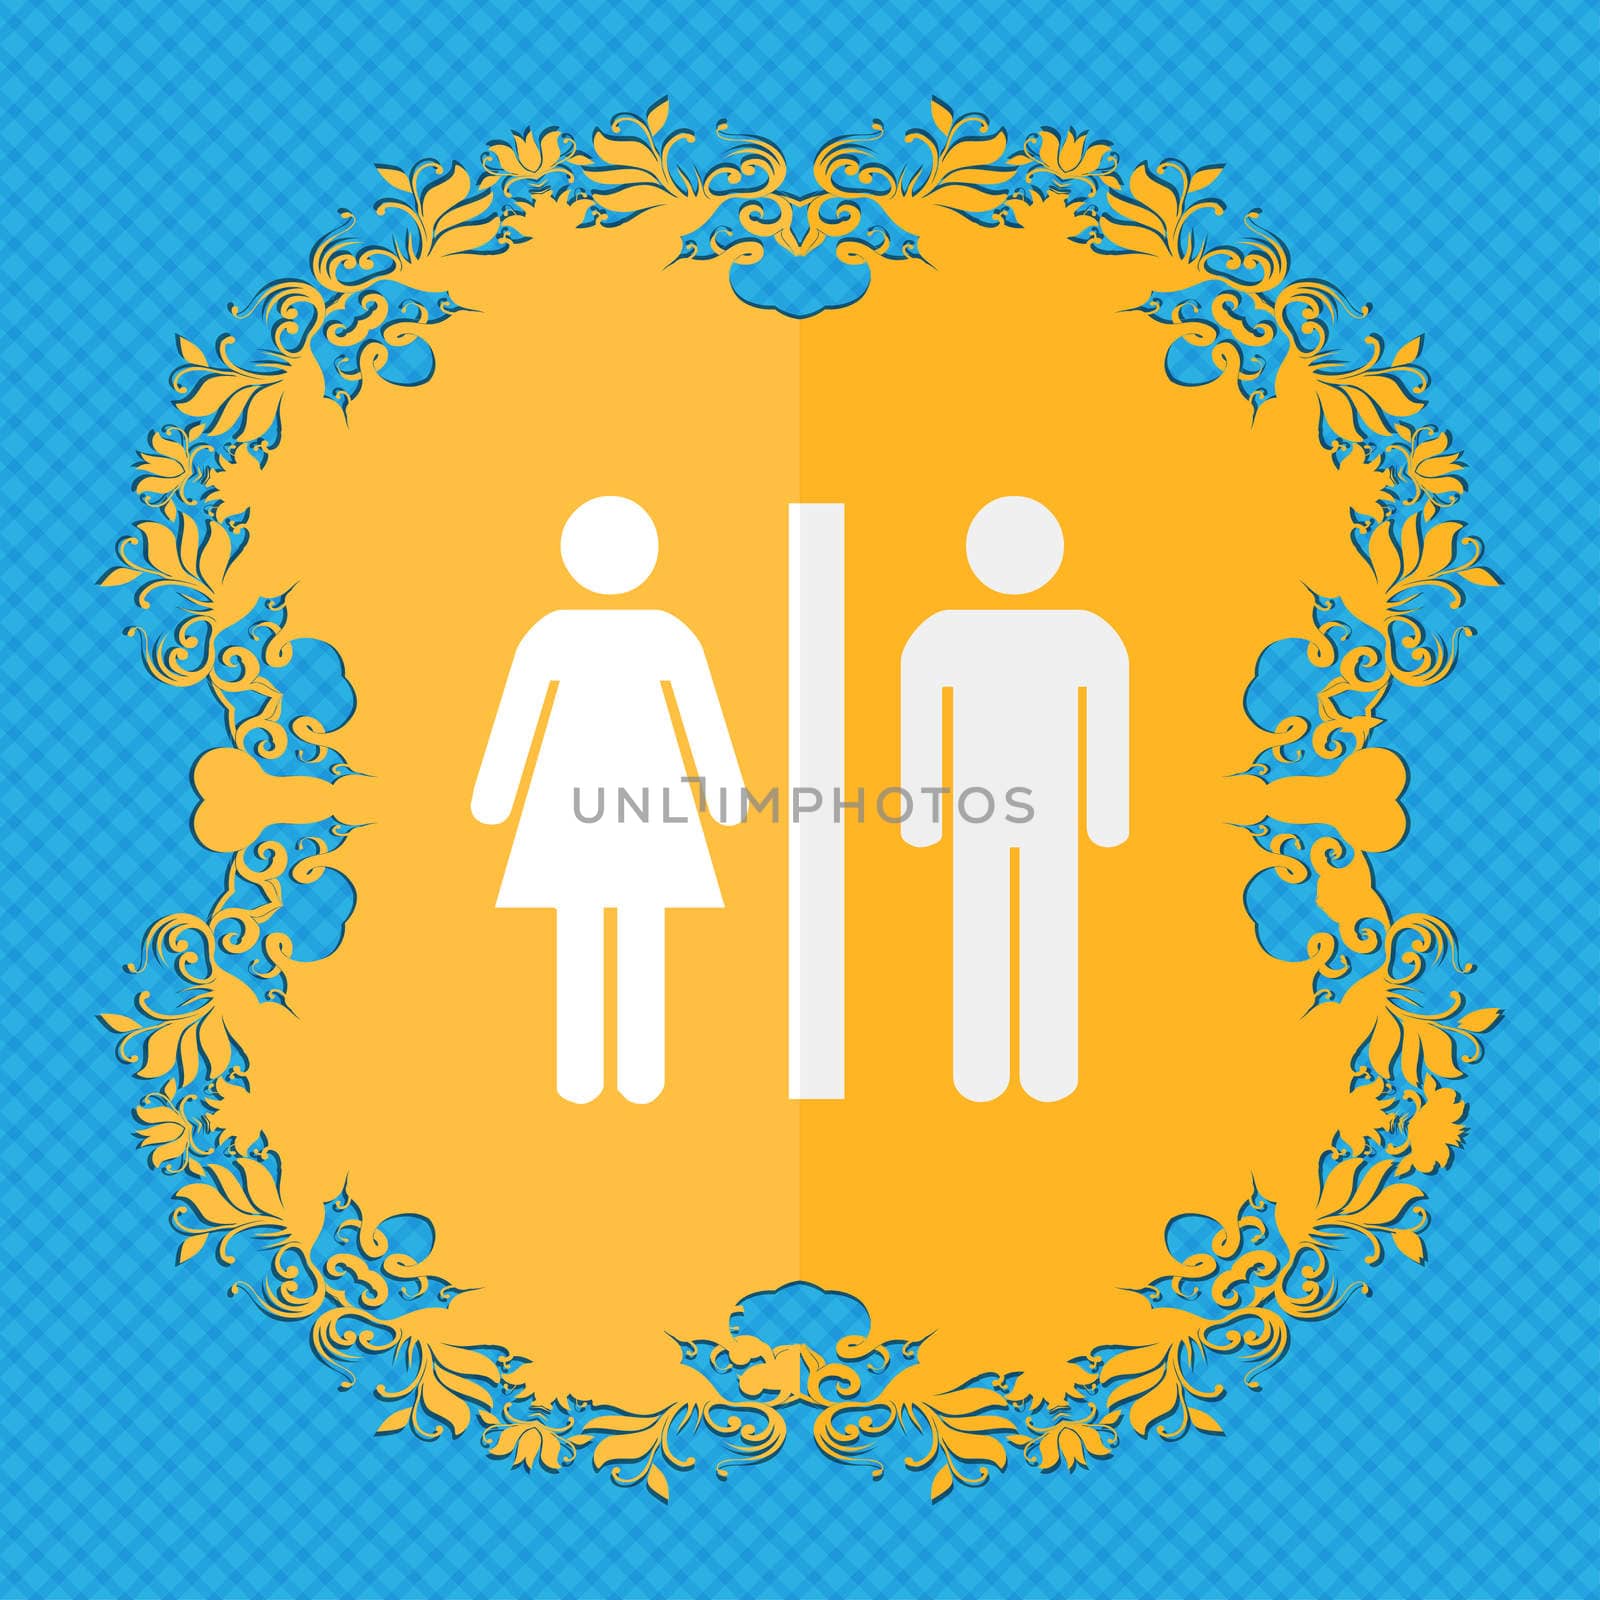 silhouette of a man and a woman. Floral flat design on a blue abstract background with place for your text. illustration